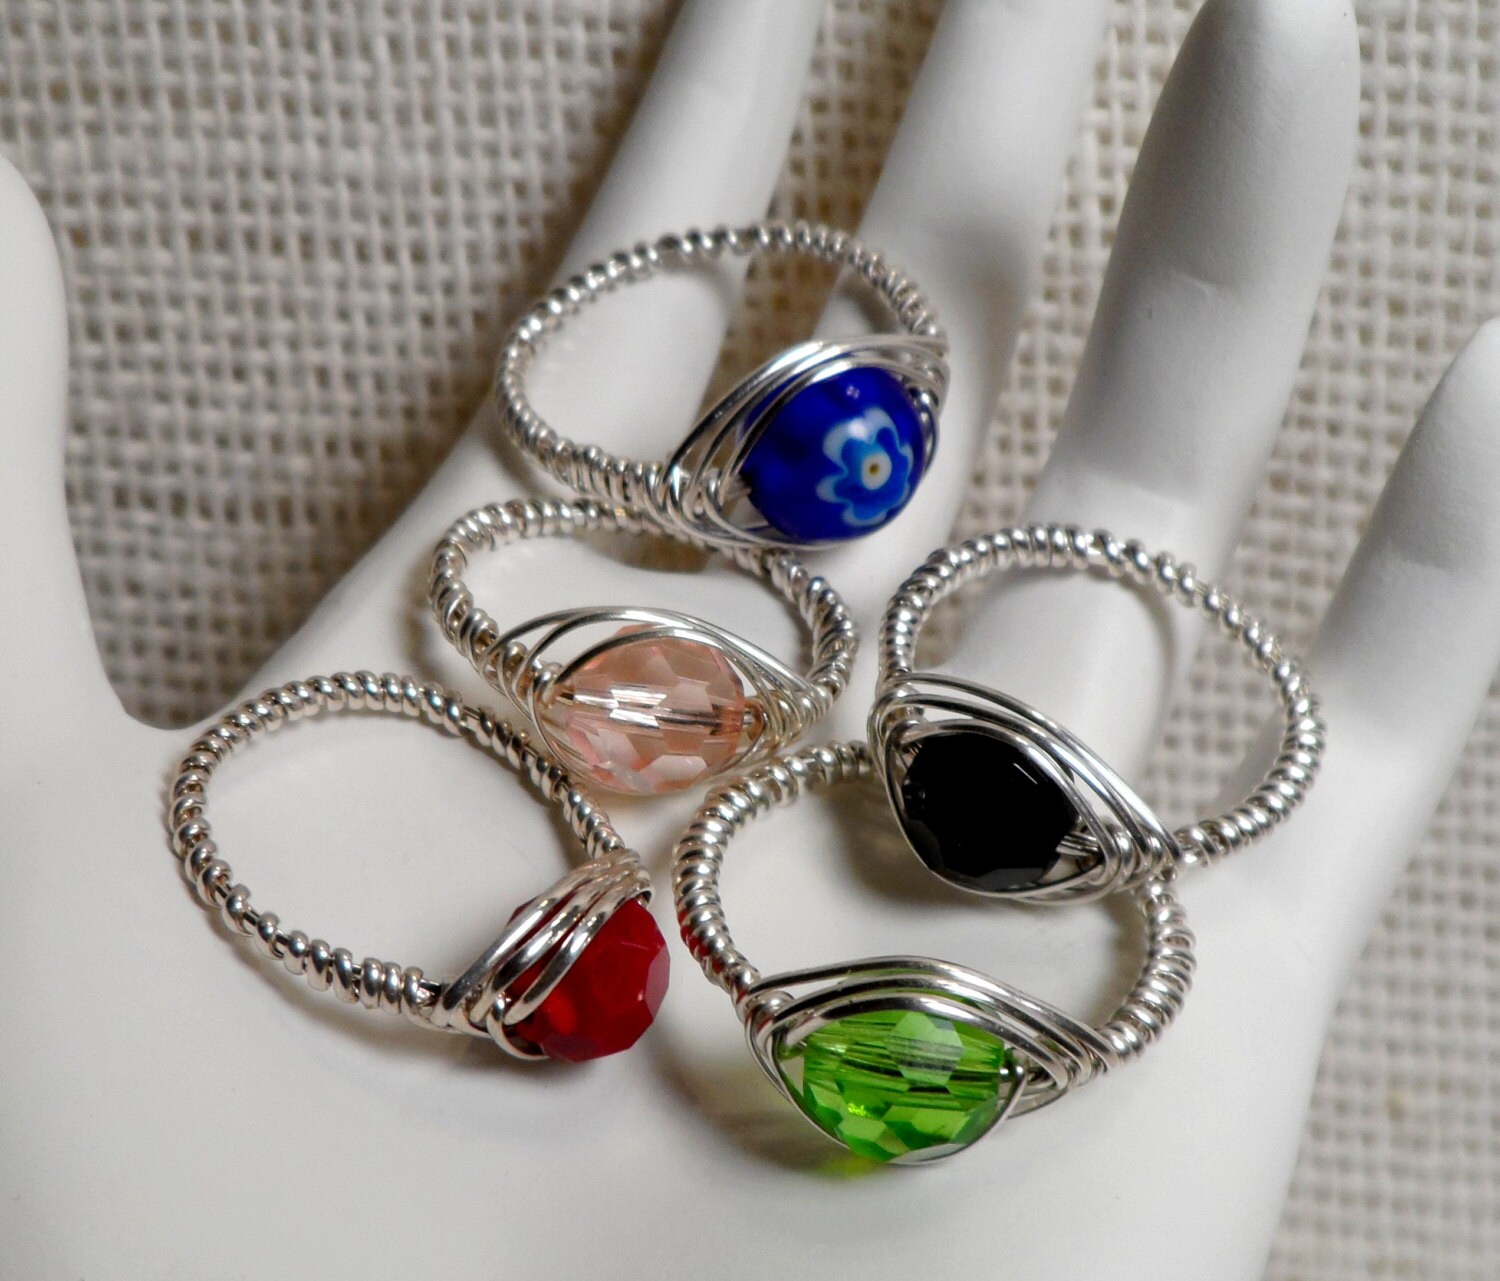 World/Atlas Bead and Sterling Silver Wire Wrapped Ring Custom made to size 4-14 